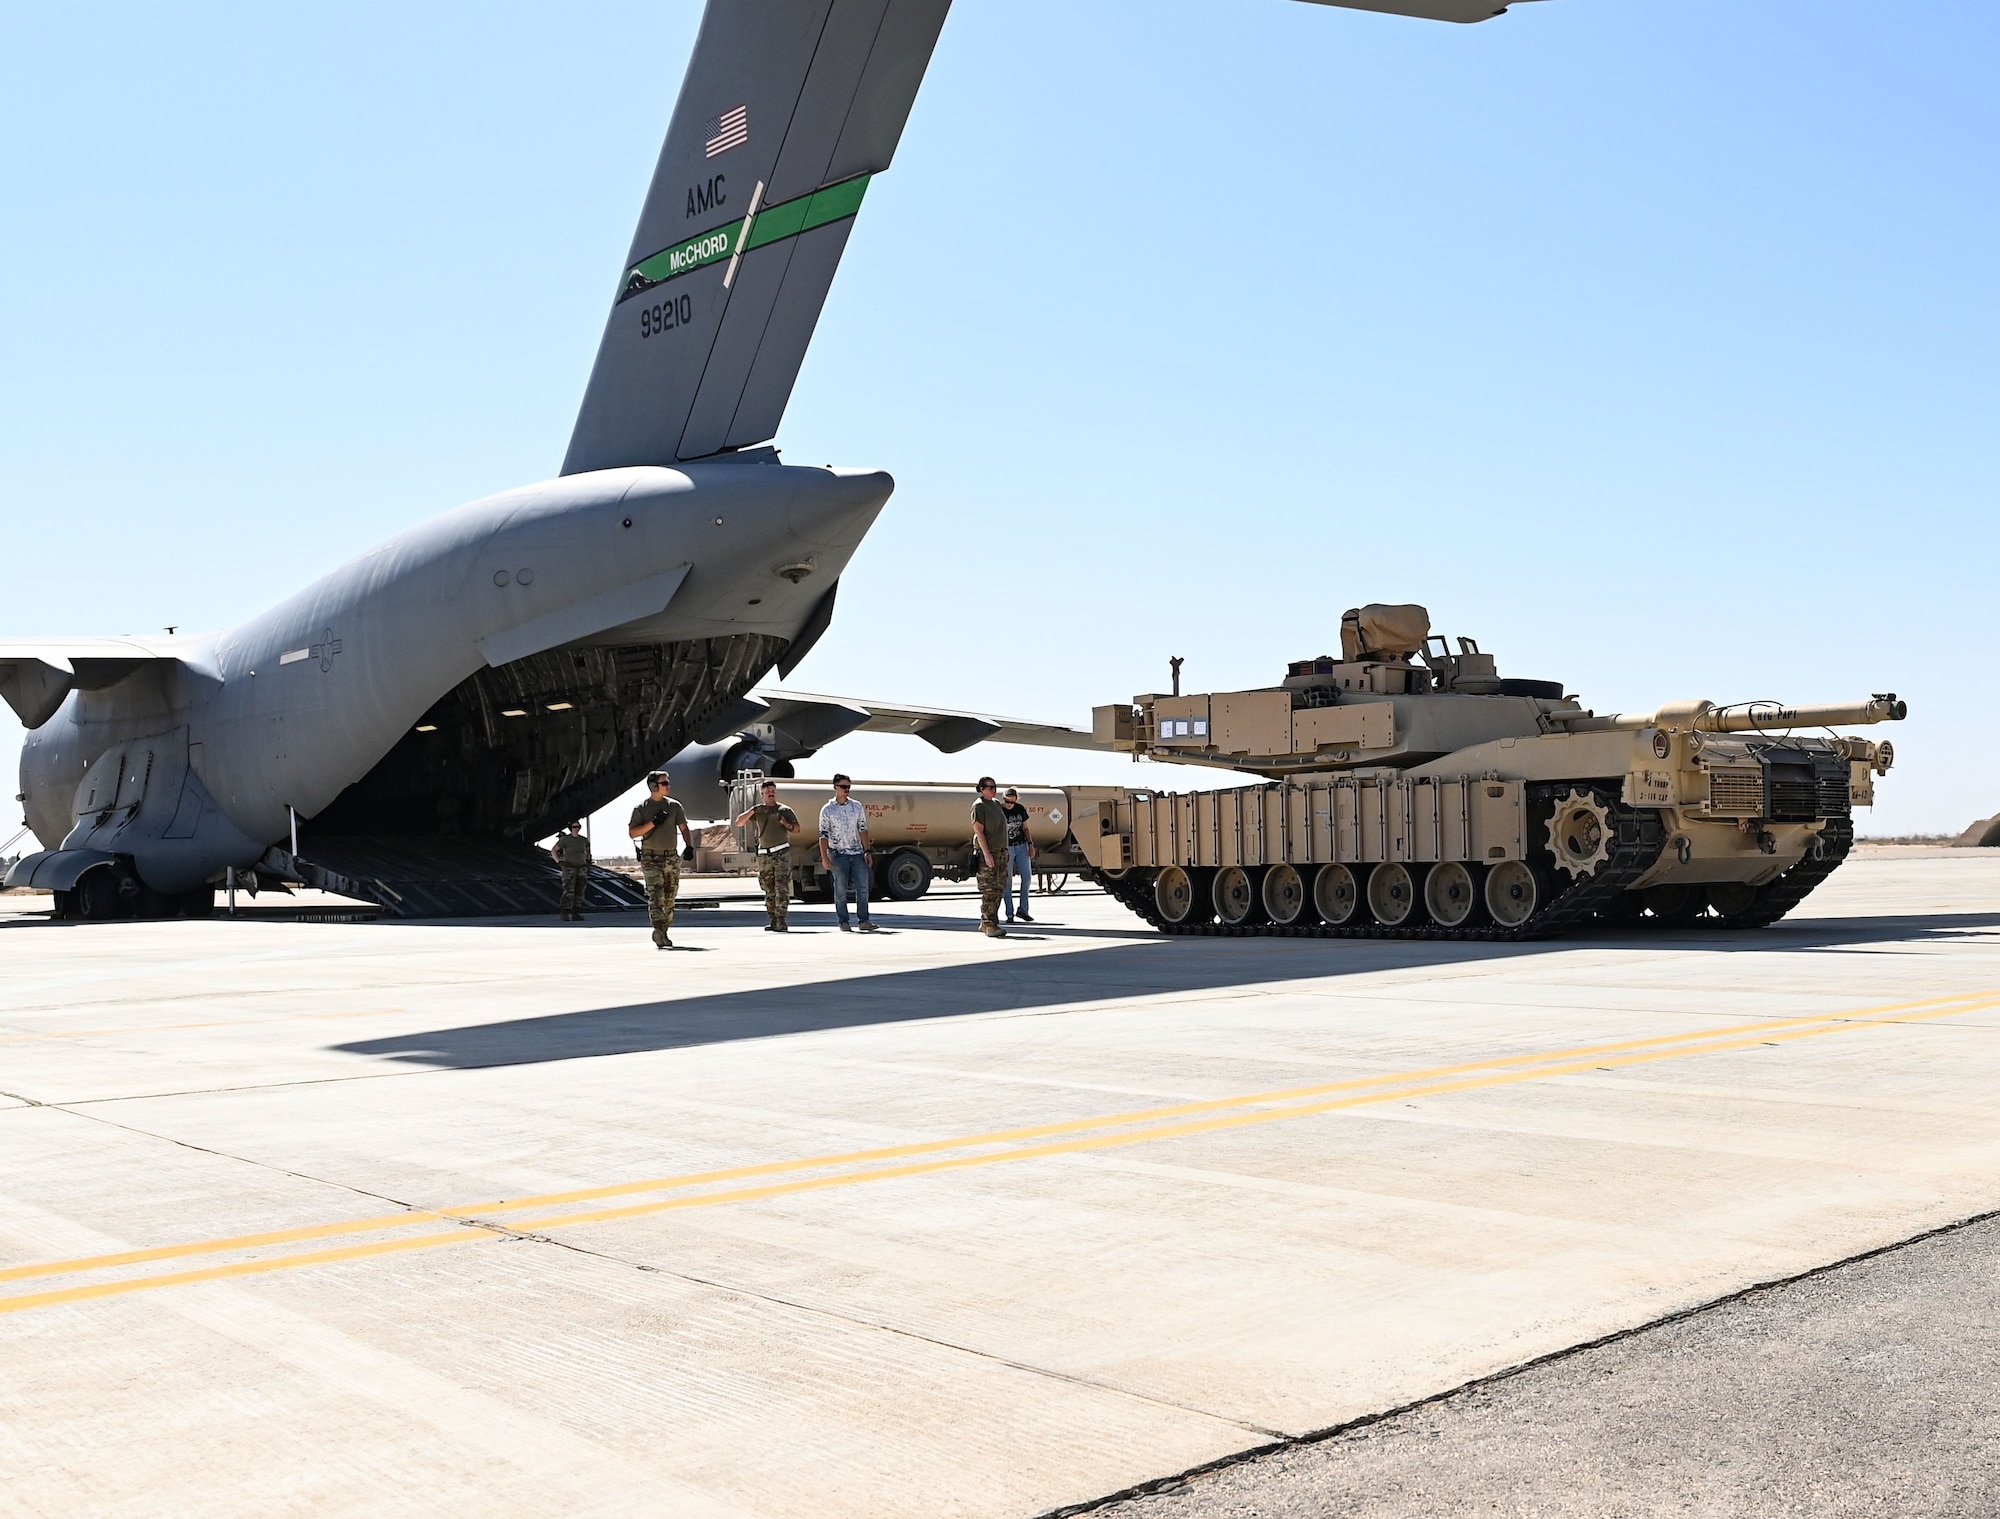 An M-1/A2 Abrams main battle tank rolls out of a C-17 Globemaster III aircraft operated by the 816th Expeditionary Airlift Squadron, Aug 27, 2022 at an undisclosed location. The 816th EAS hauls cargo and personnel across the Air Forces Central area of responsibility. (U.S. Air National Guard photo by Master Sgt. Michael J. Kelly)